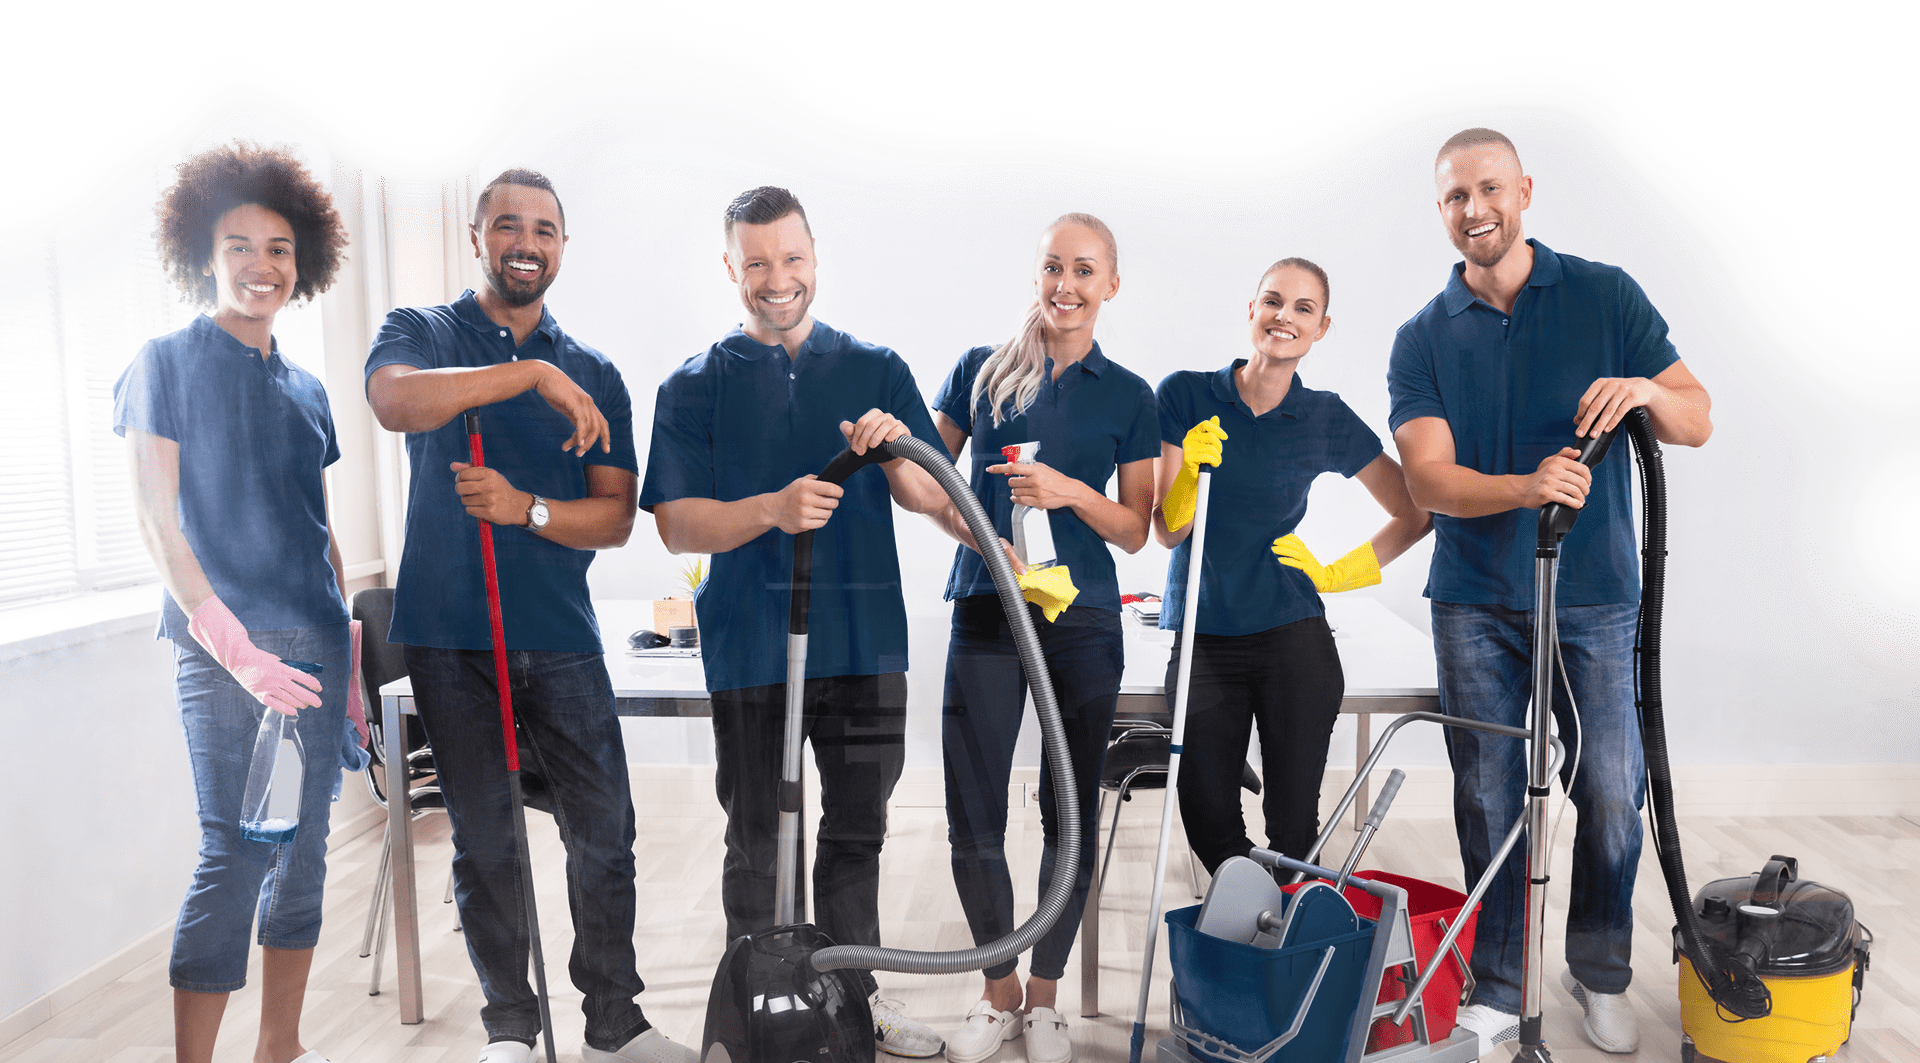 FIND YOUR RECOMMENDED LOCAL MOLD REMOVAL PROFESSIONAL